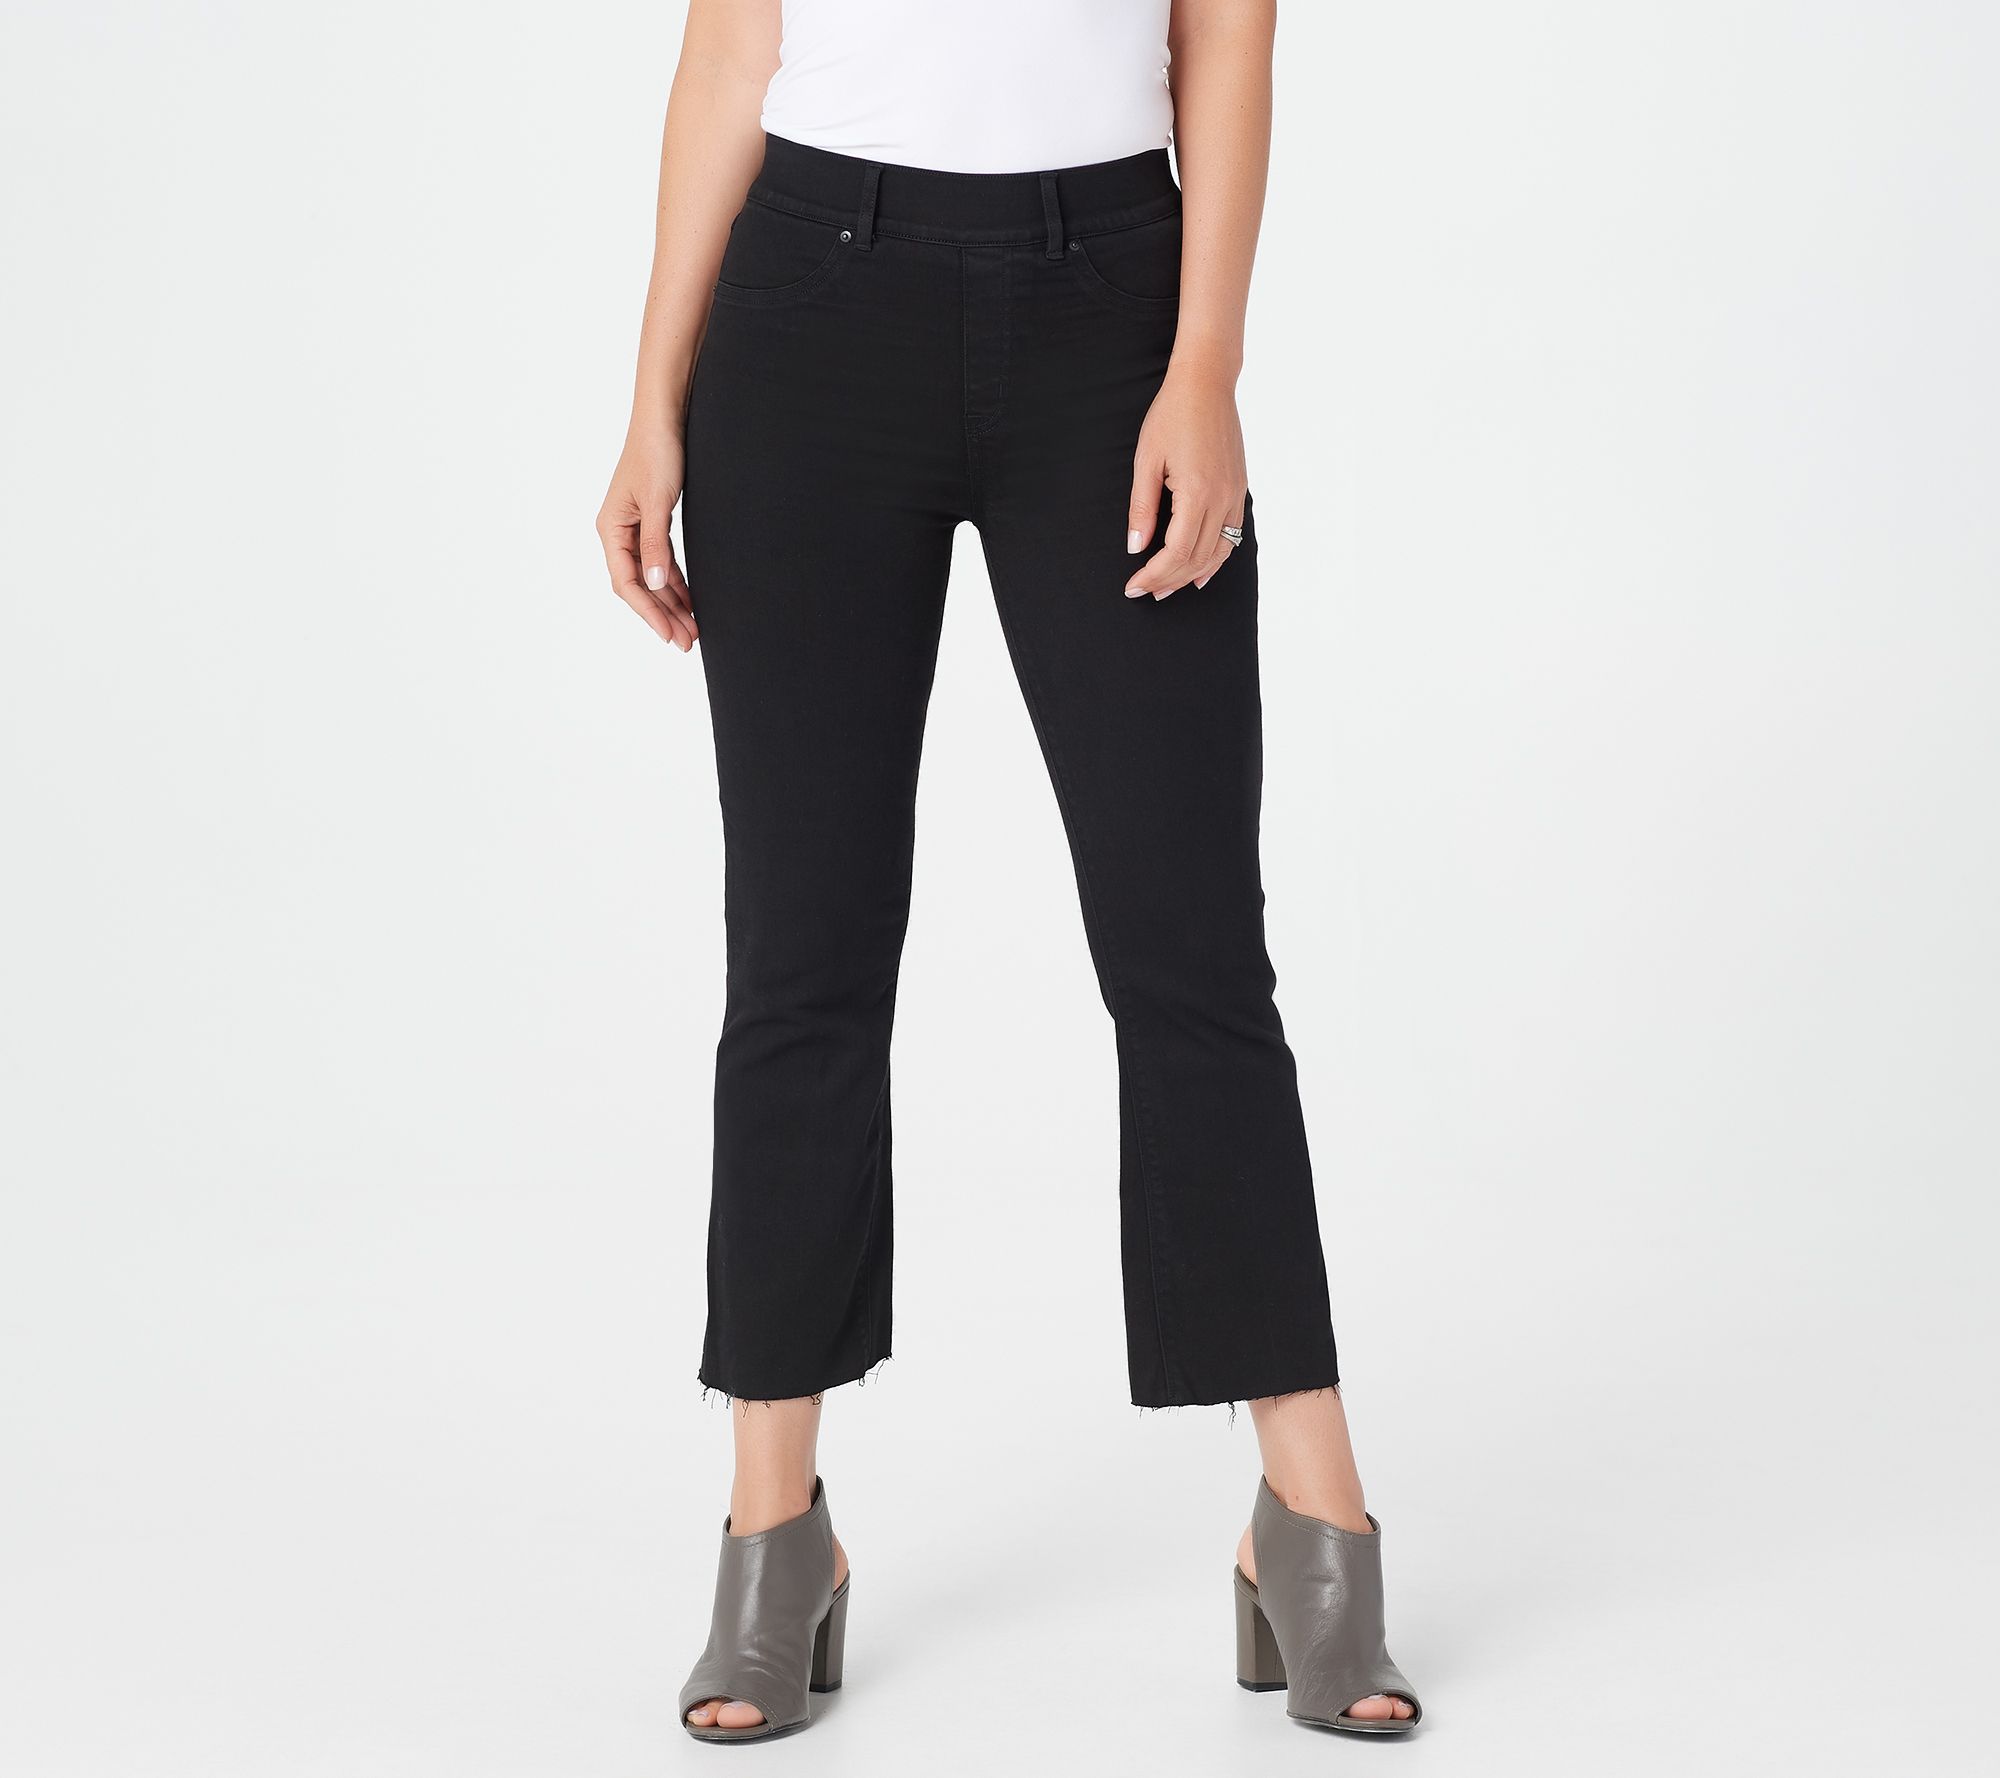 Spanx Black Wash Cropped Flare Jeans - QVC.com